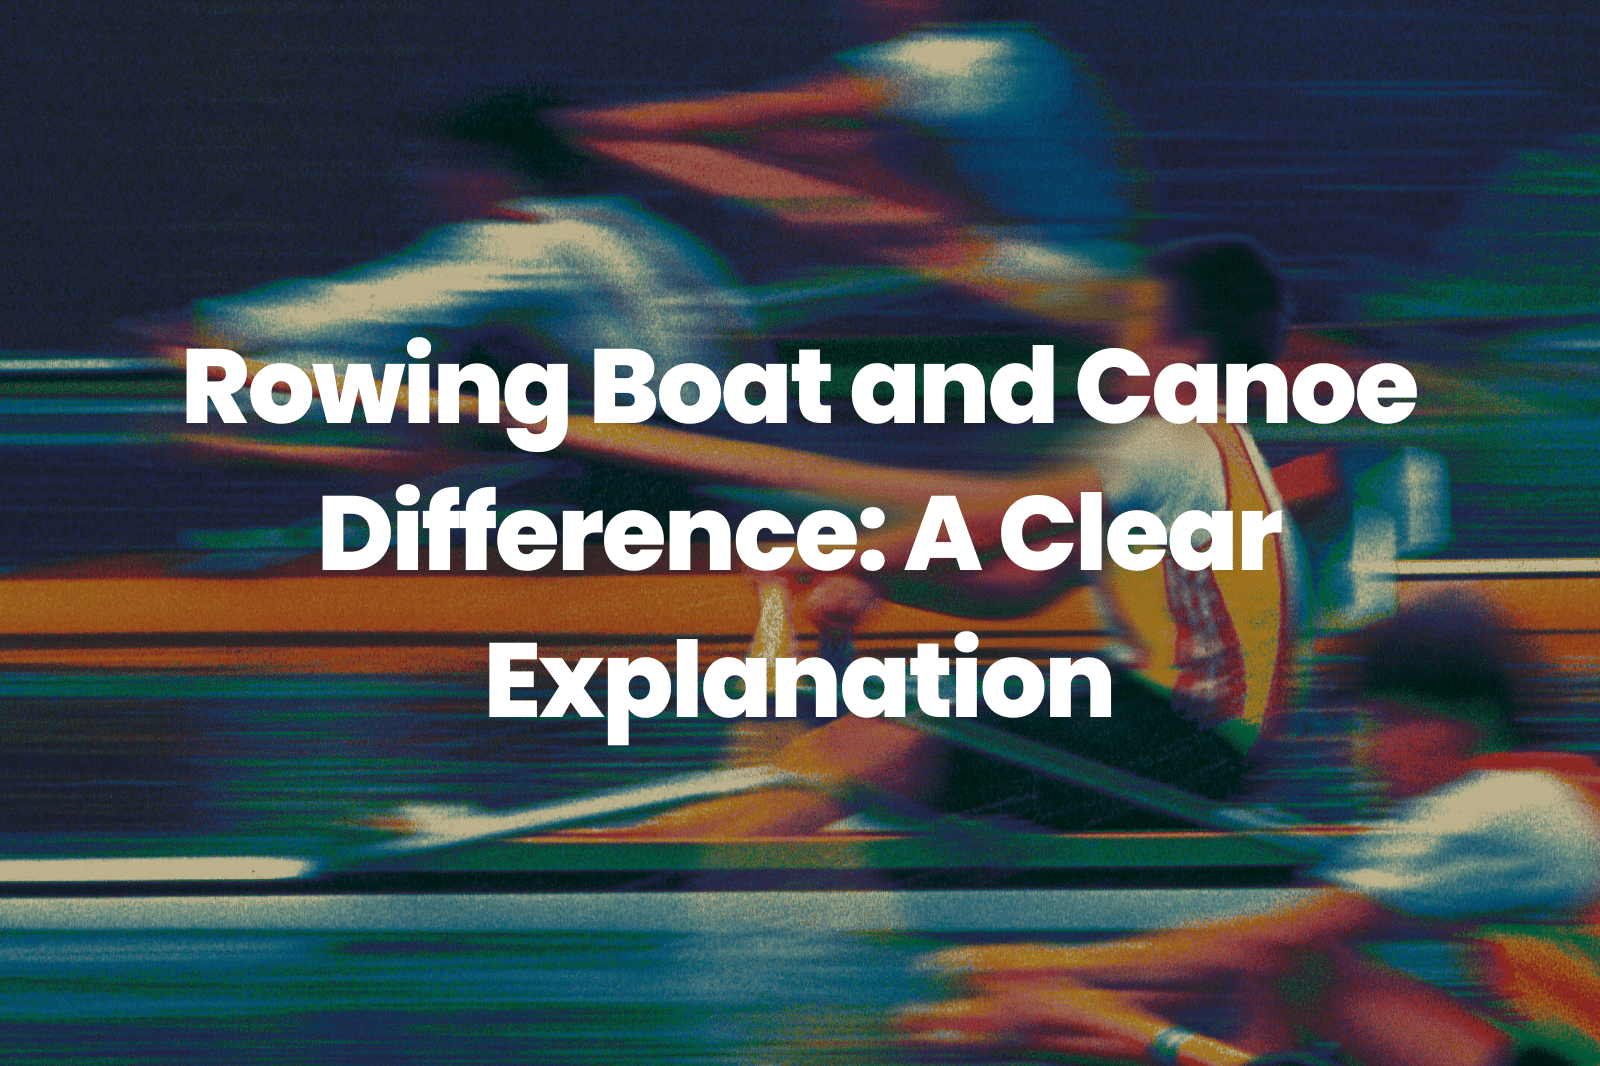 Rowing Boat and Canoe Difference